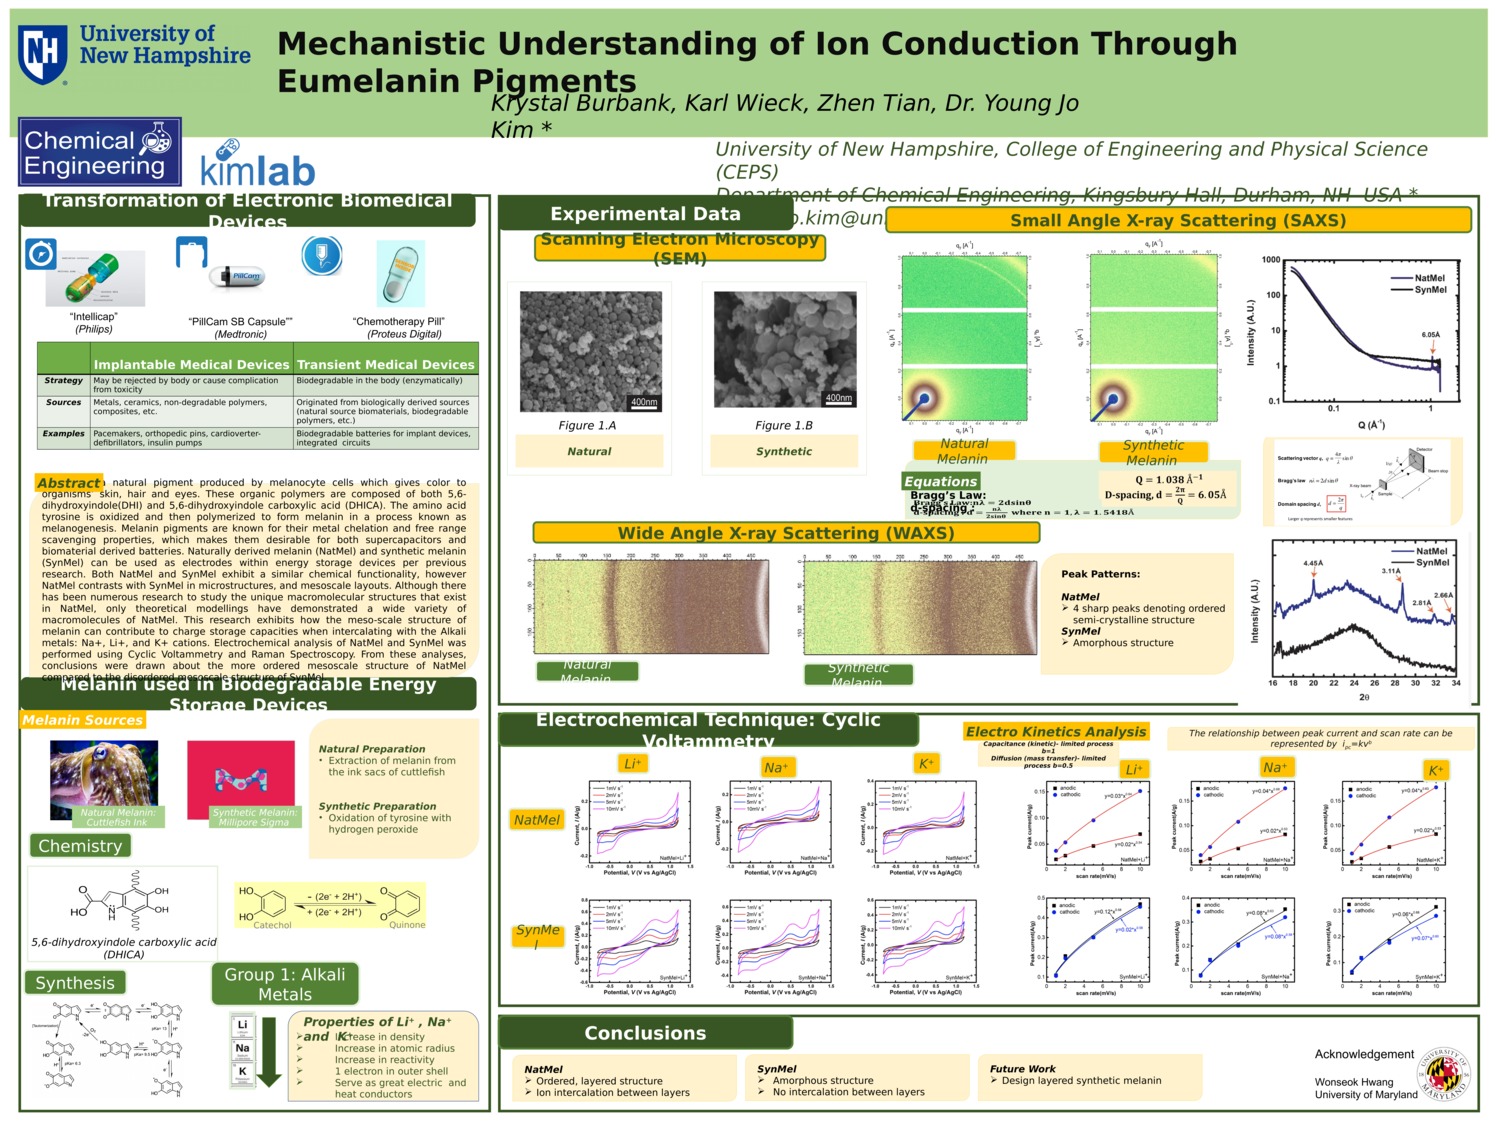 Mechanistic Understanding Of Ion Conduction Through Eumelanin Pigments by karlwieck